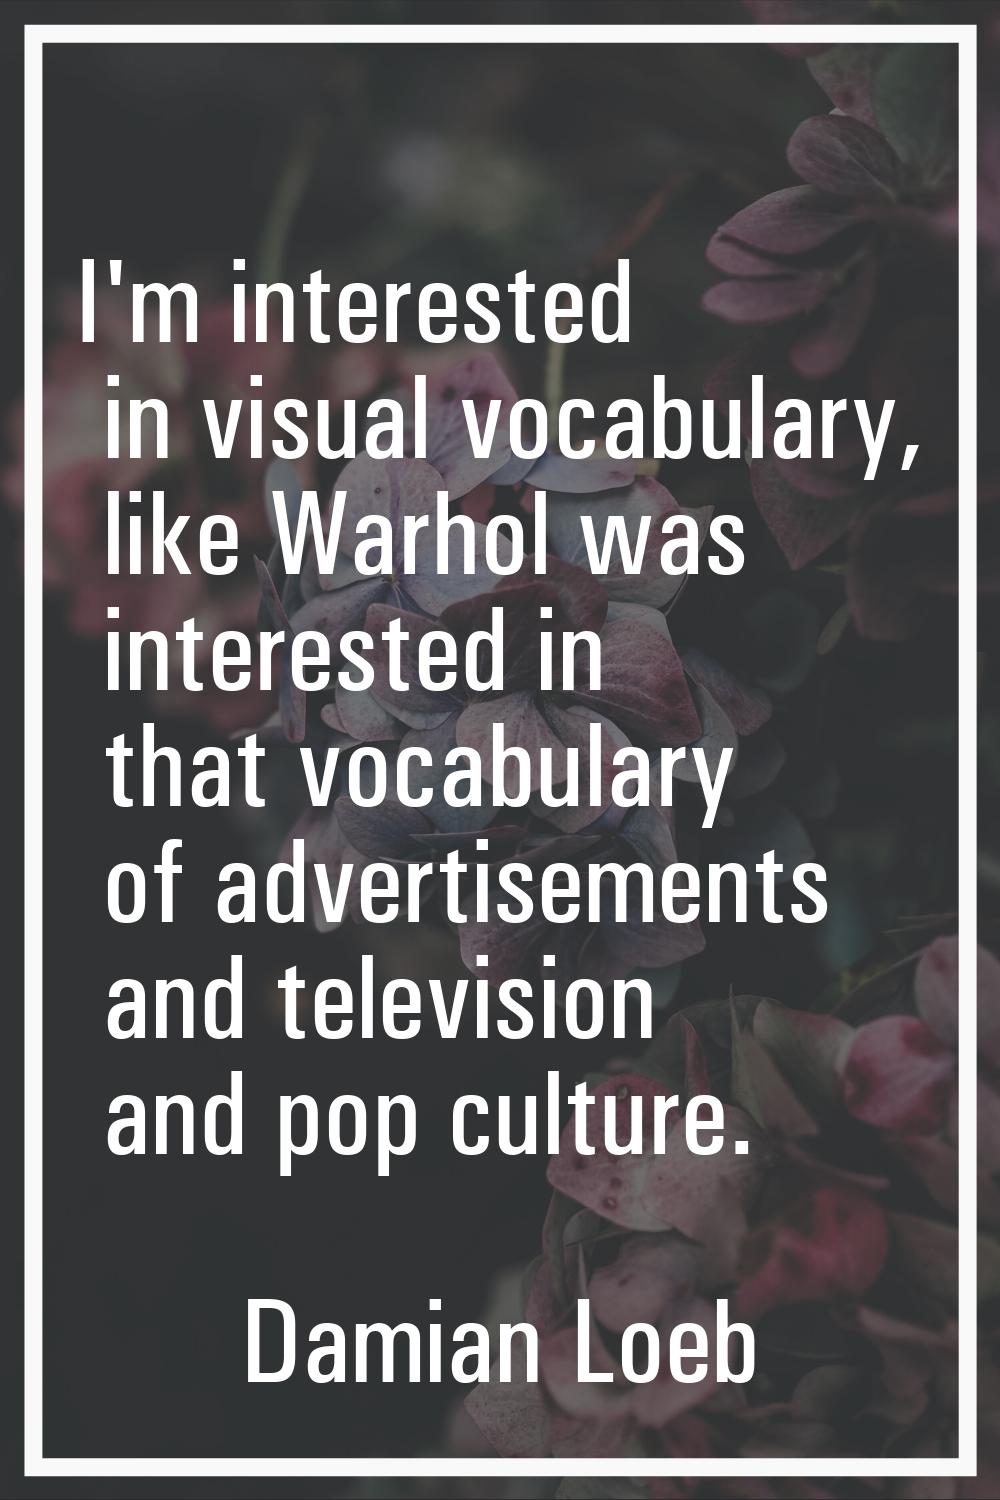 I'm interested in visual vocabulary, like Warhol was interested in that vocabulary of advertisement